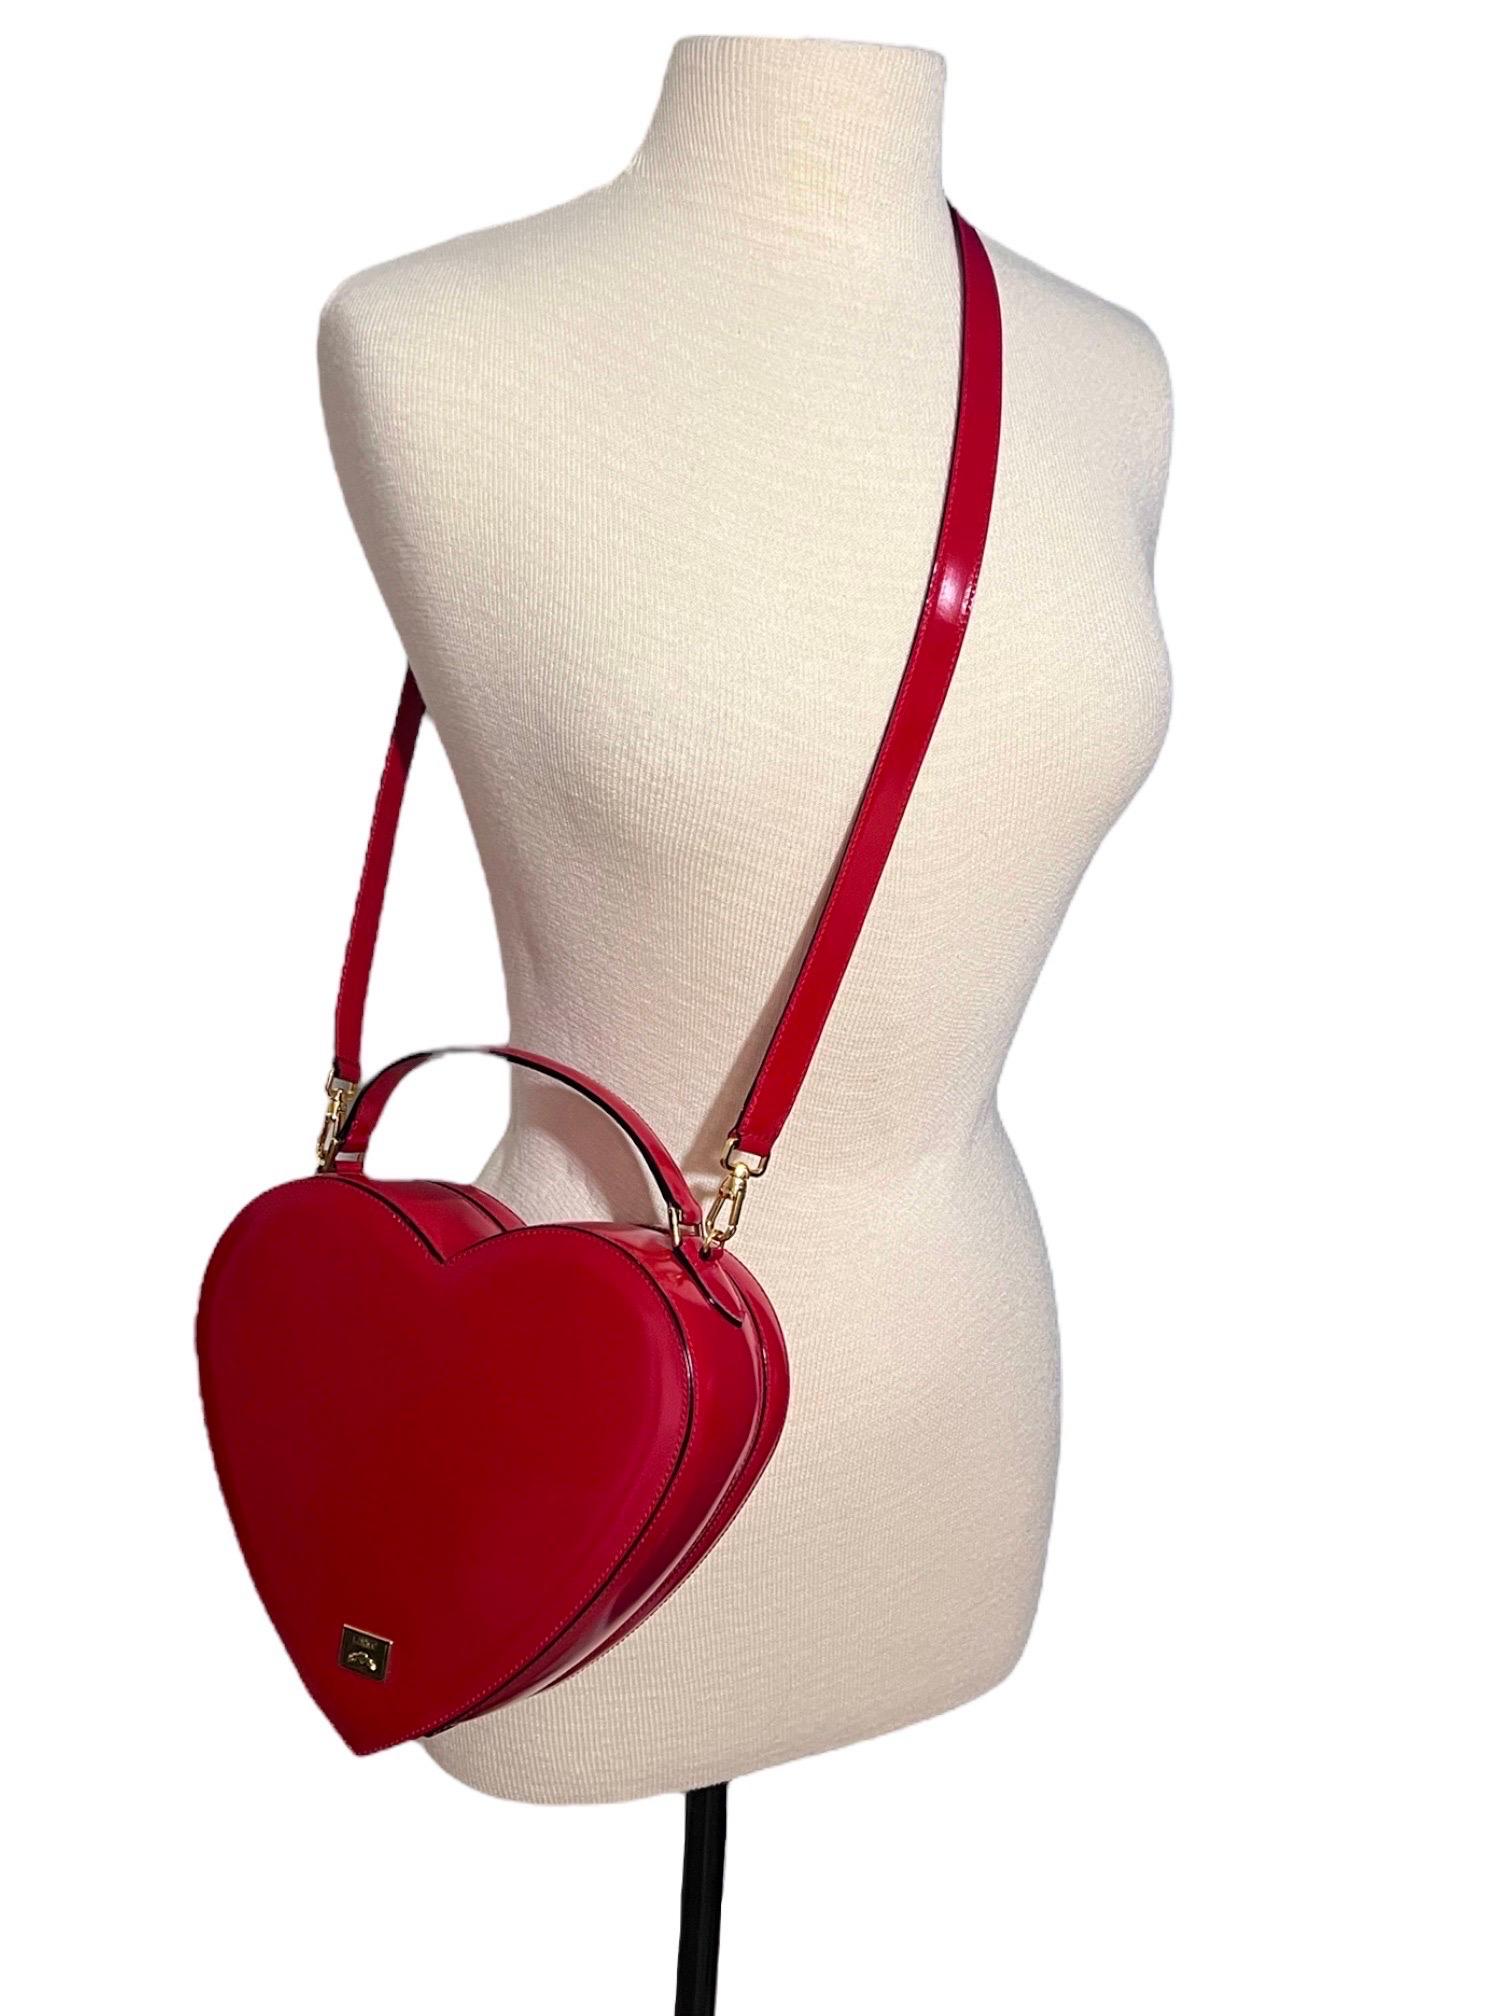 Women's Moschino Vintage Red Leather Heart Bag The Nanny